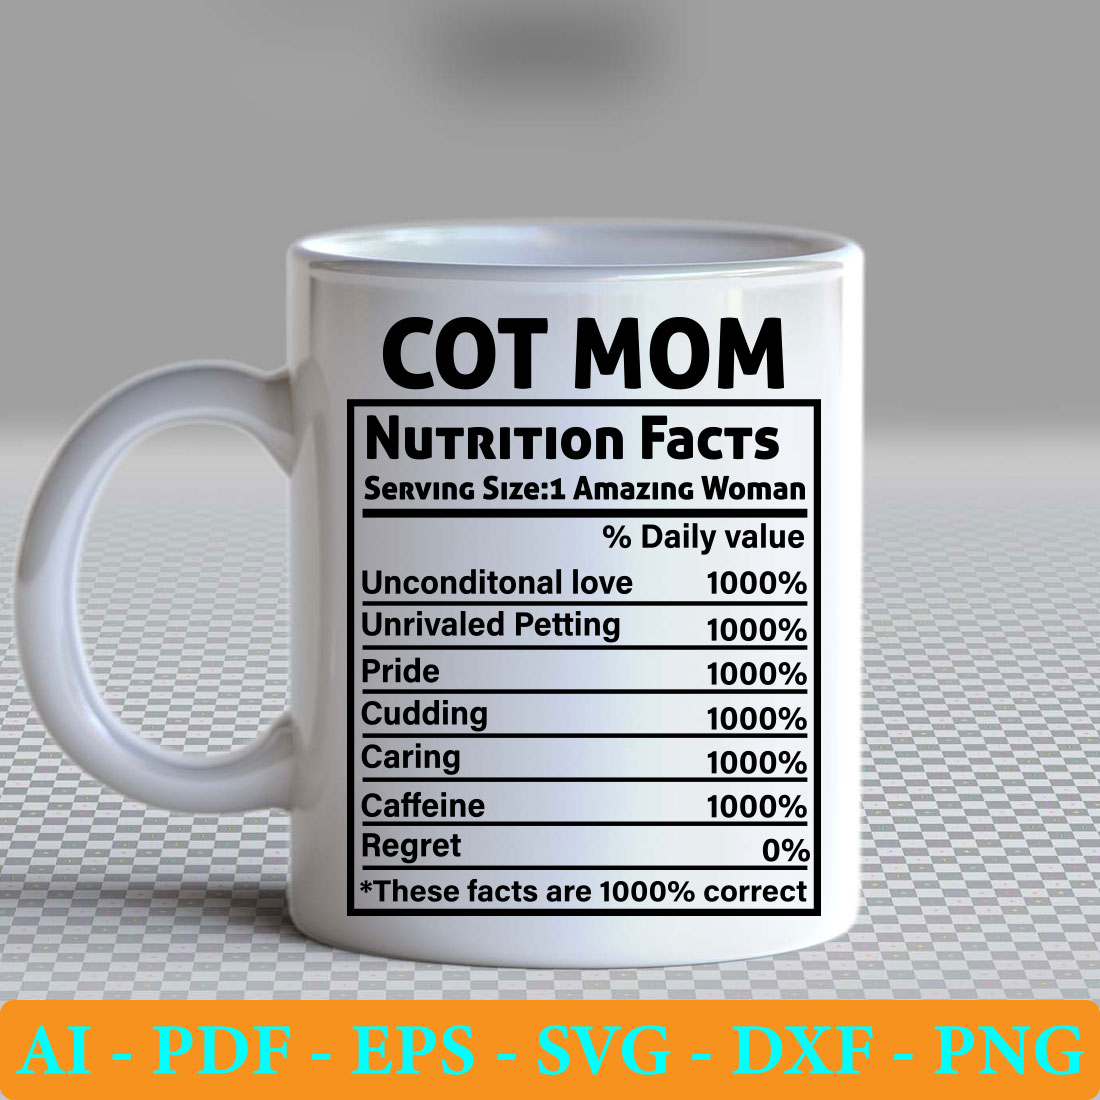 Coffee mug with a nutrition label on it.